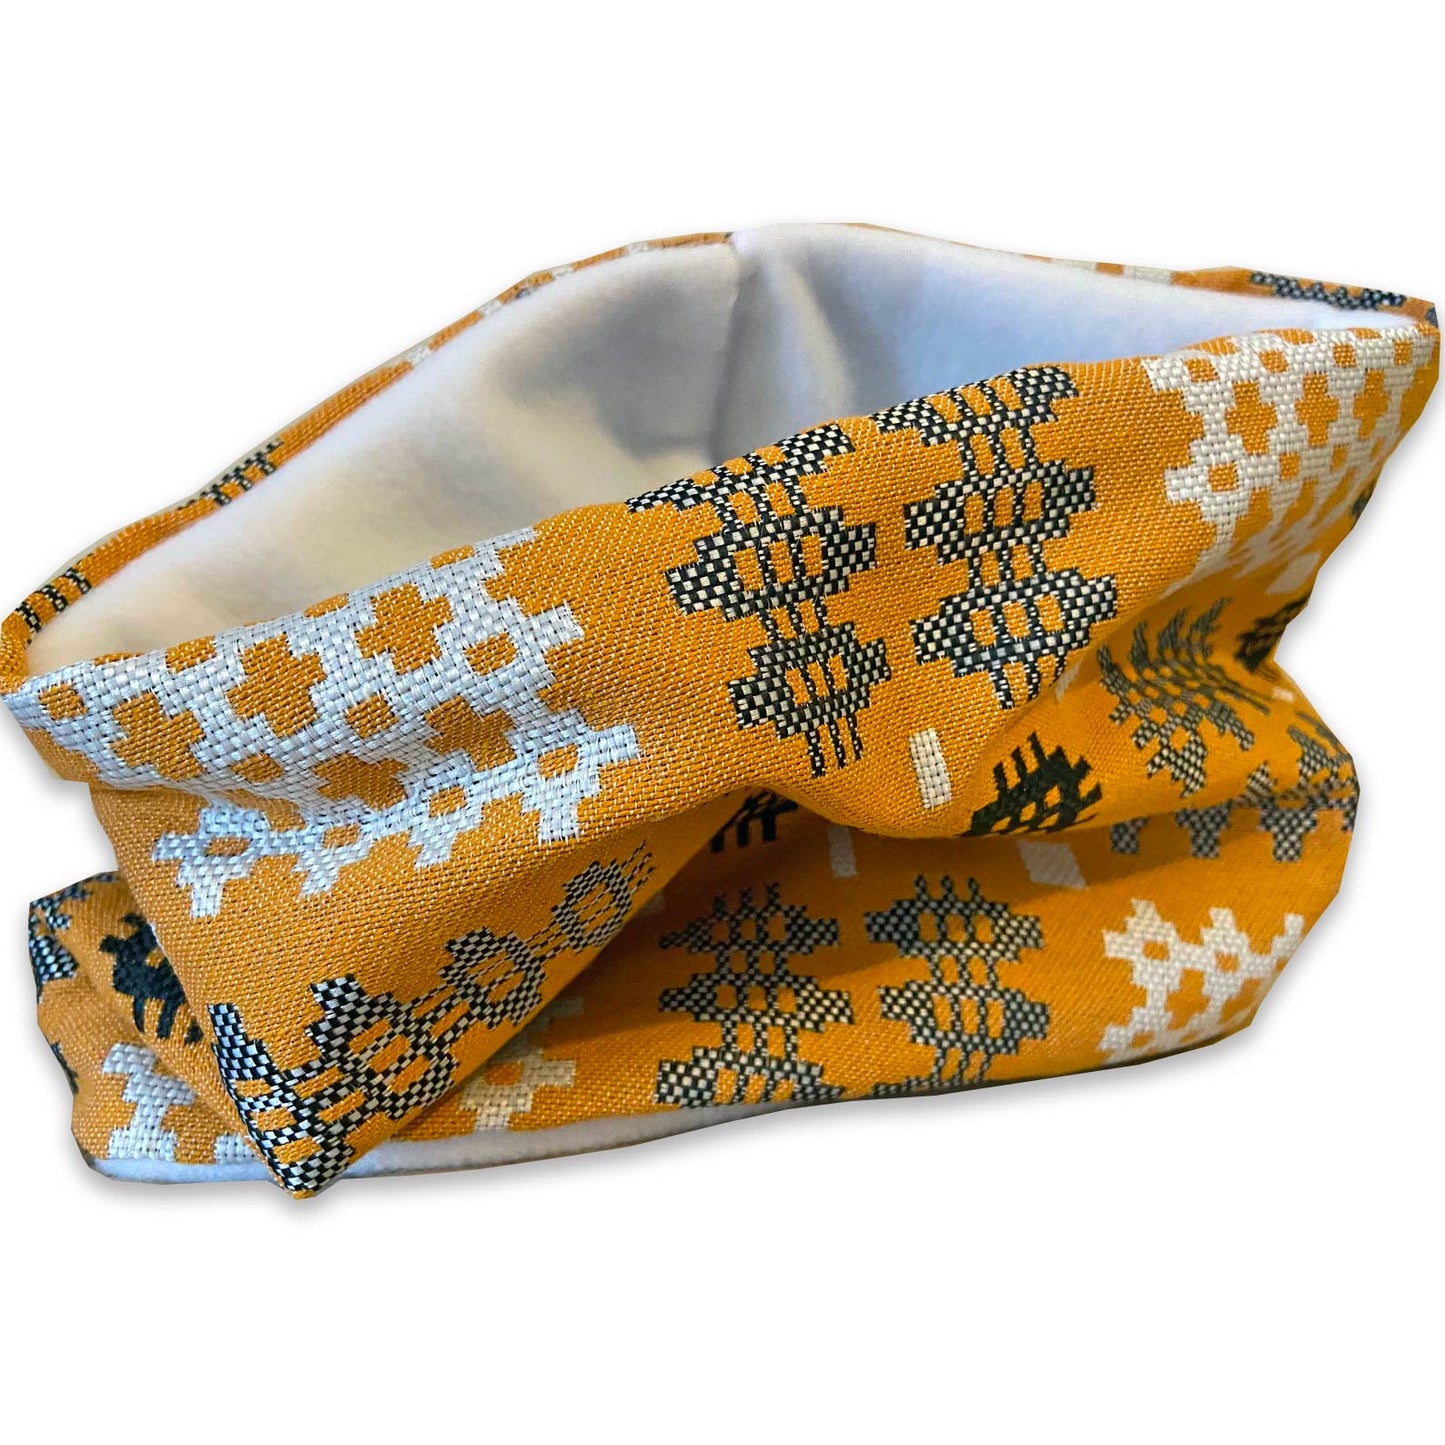 Snood / Scarf - Welsh Tapestry Print - Mustard Yellow